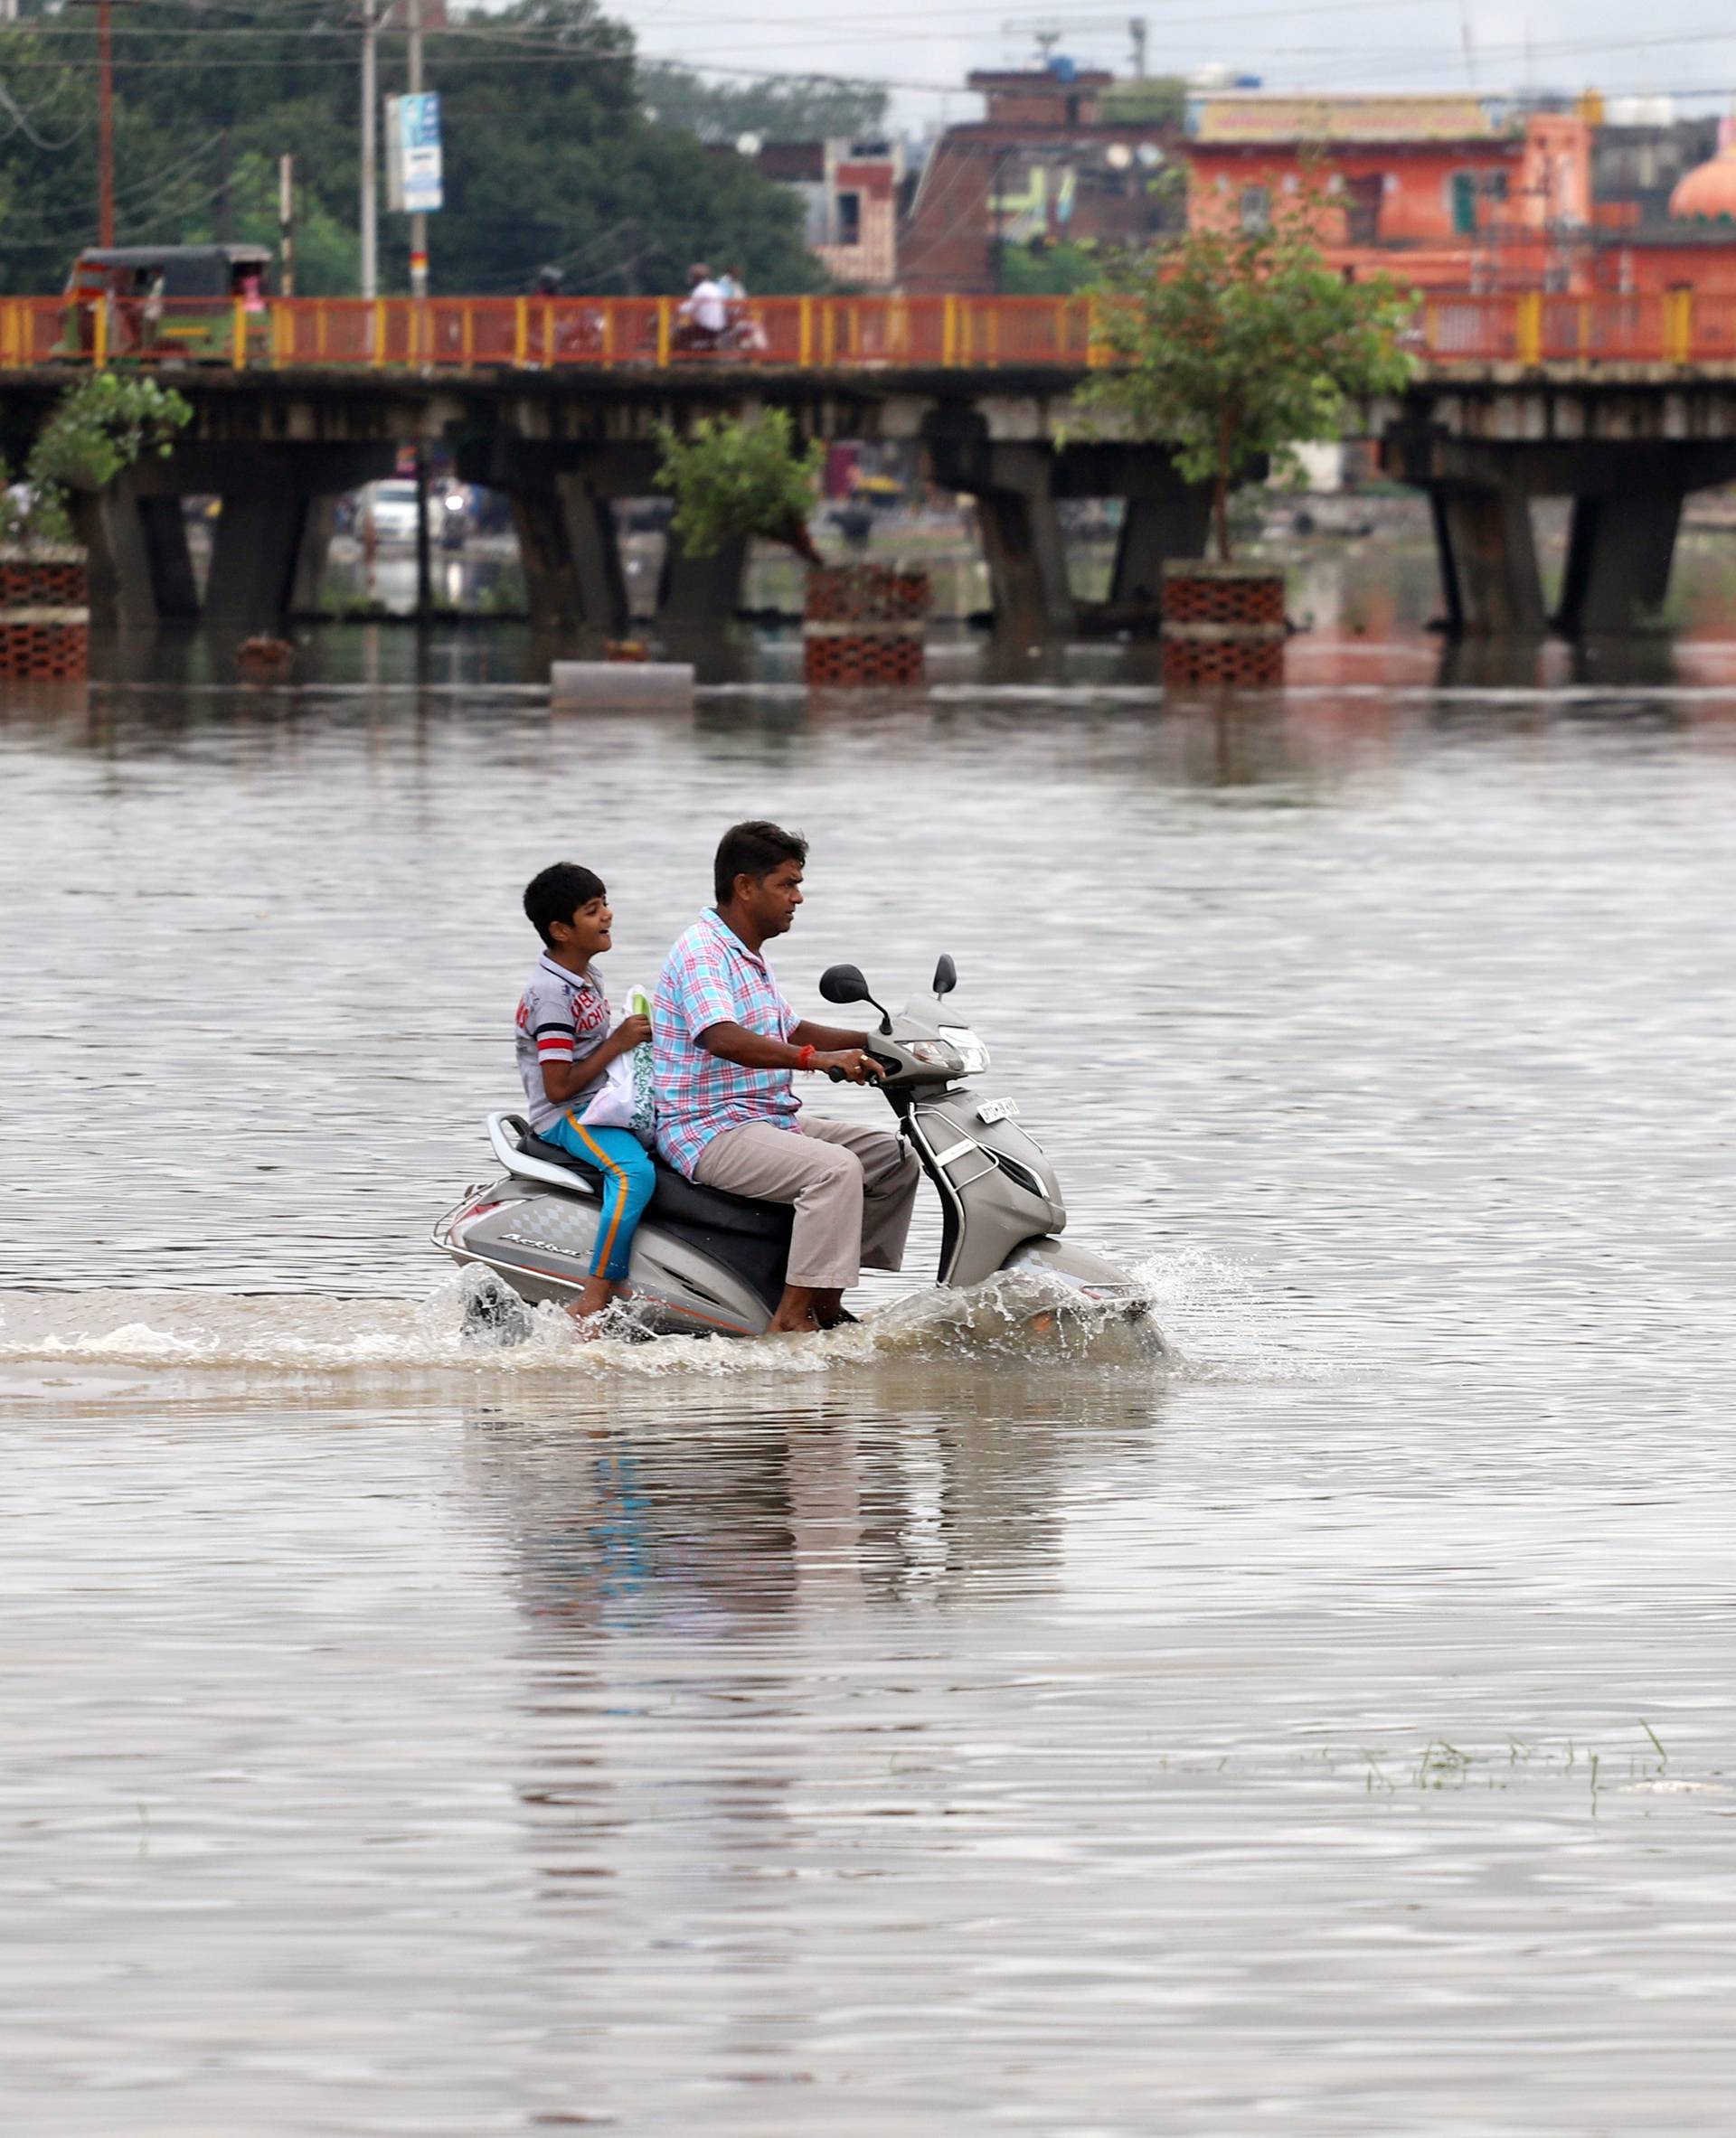 A man and a boy ride a scooter through a flooded road after heavy rains in Prayagraj